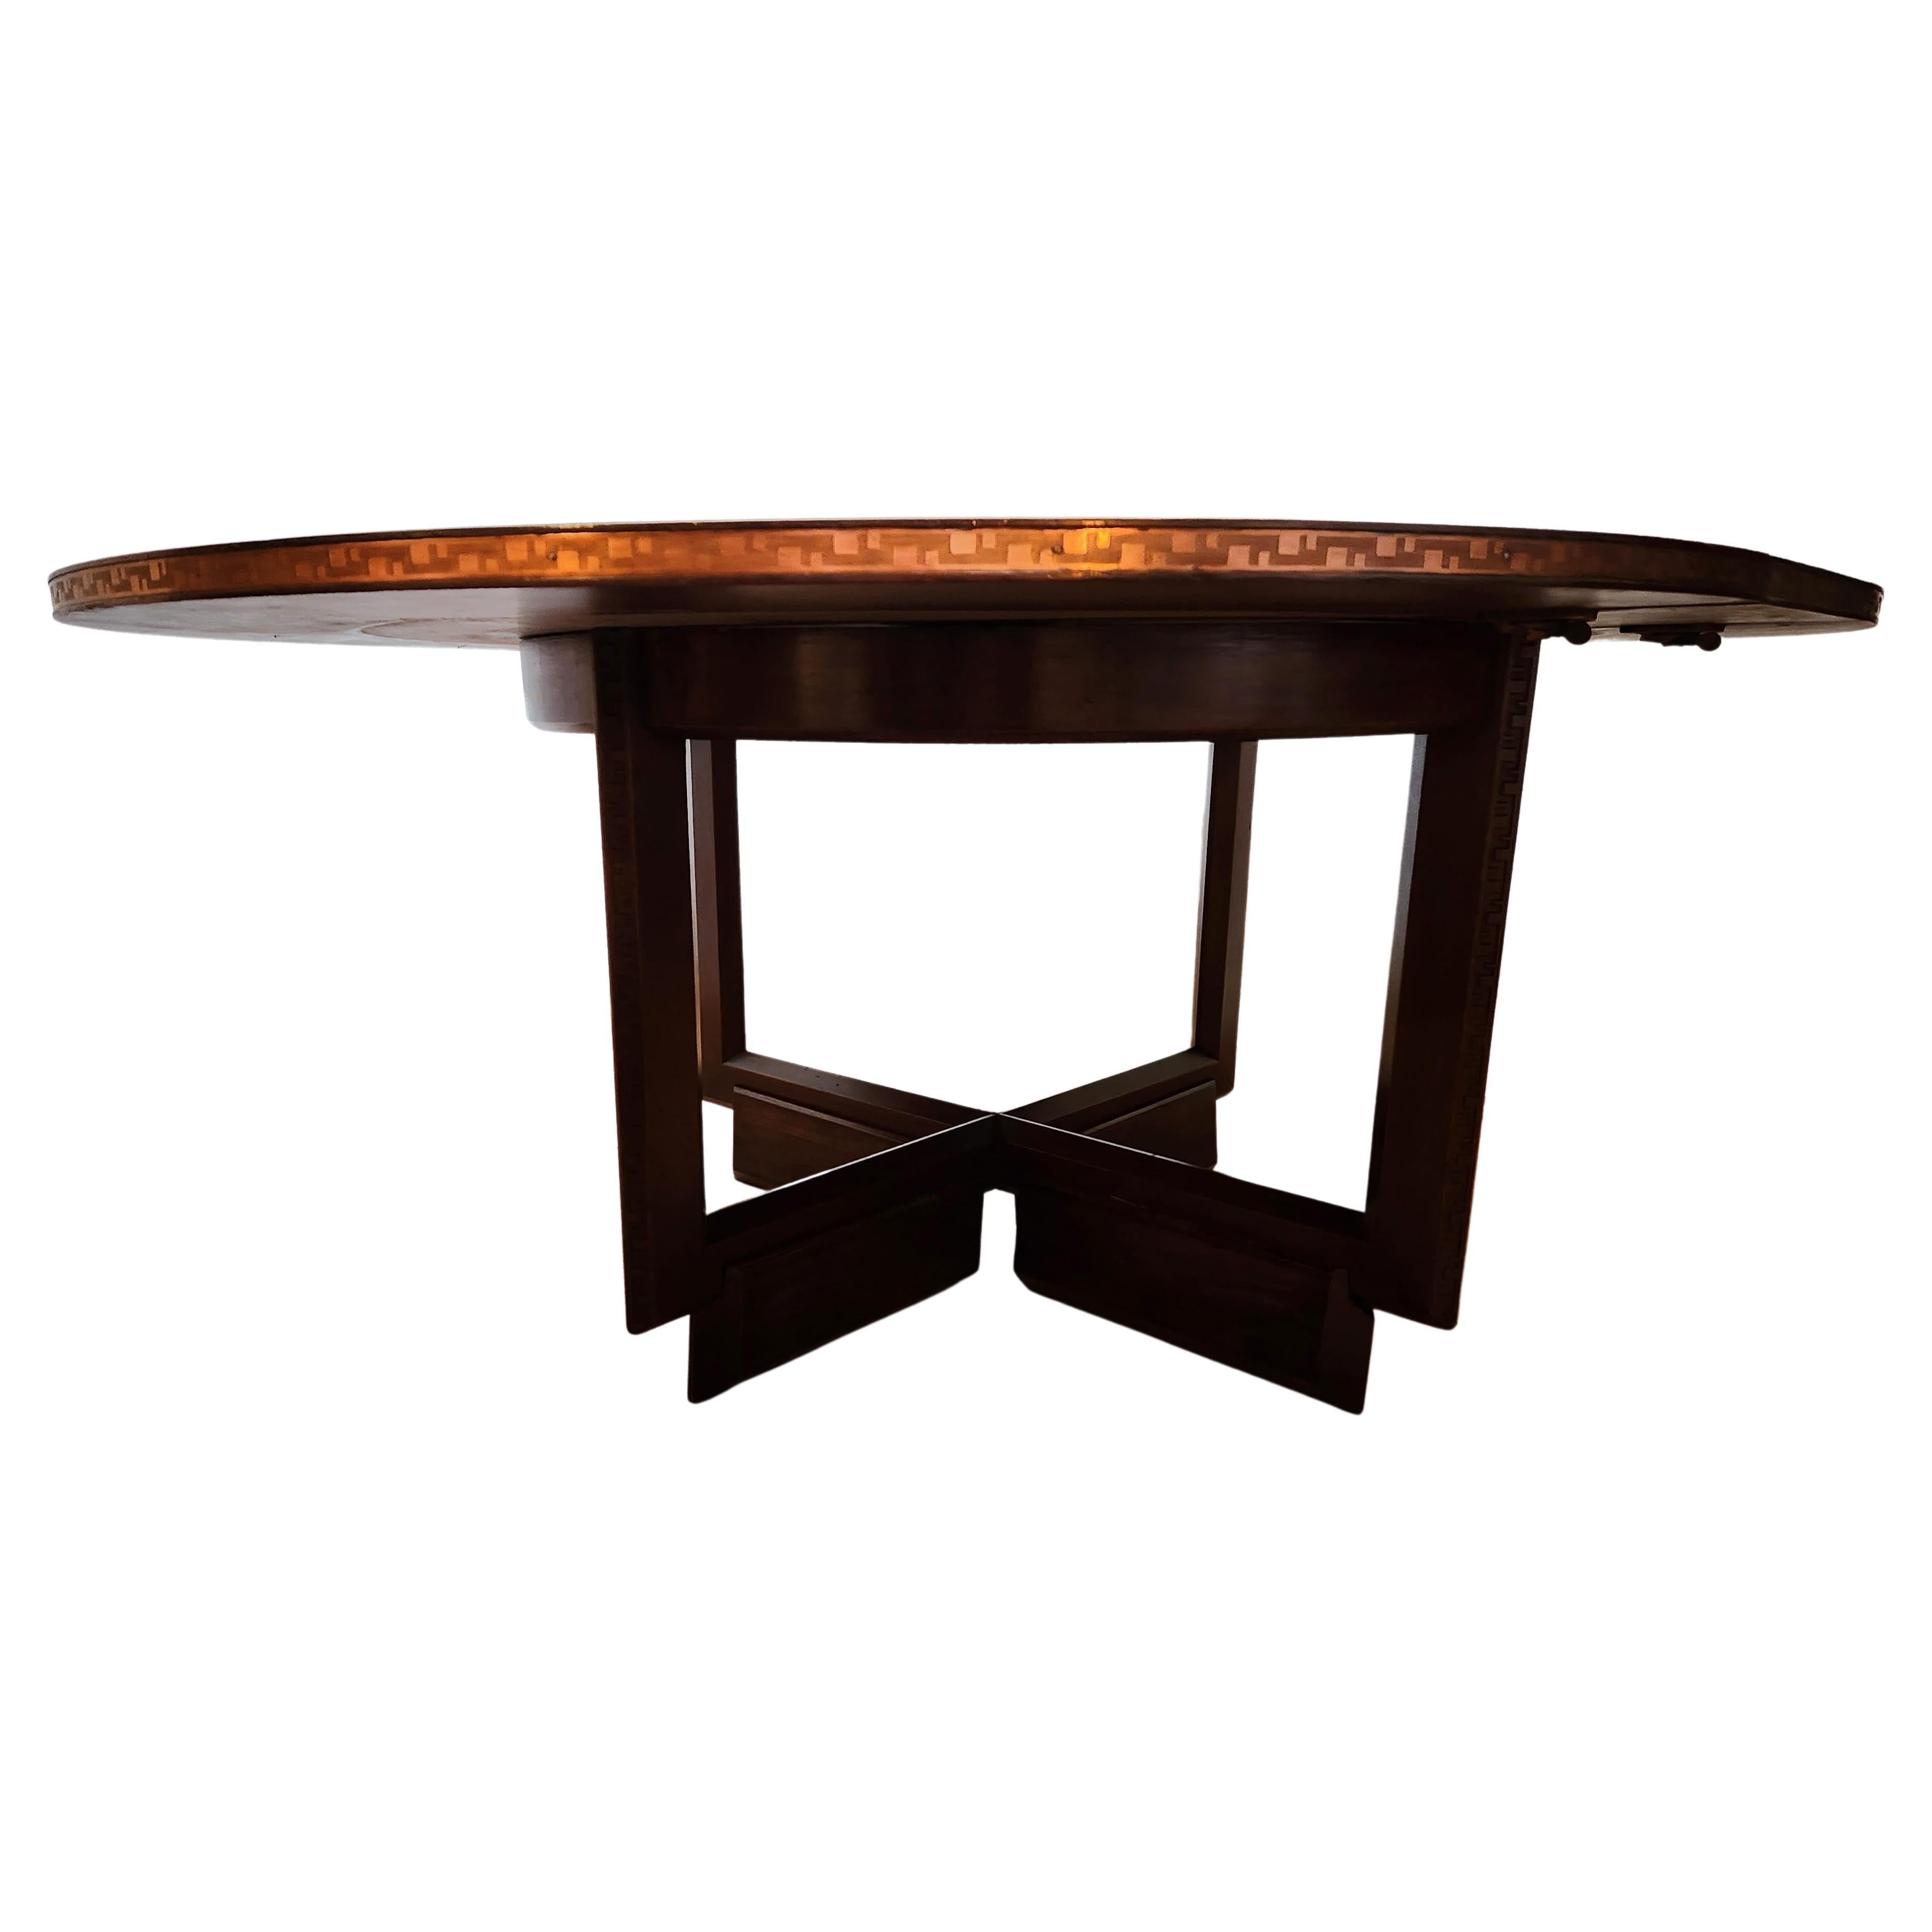 Classic Frank Lloyd Wright copper banded game table from Heritage Henredon manufactured for the two years 1955/56.
This table has a 12